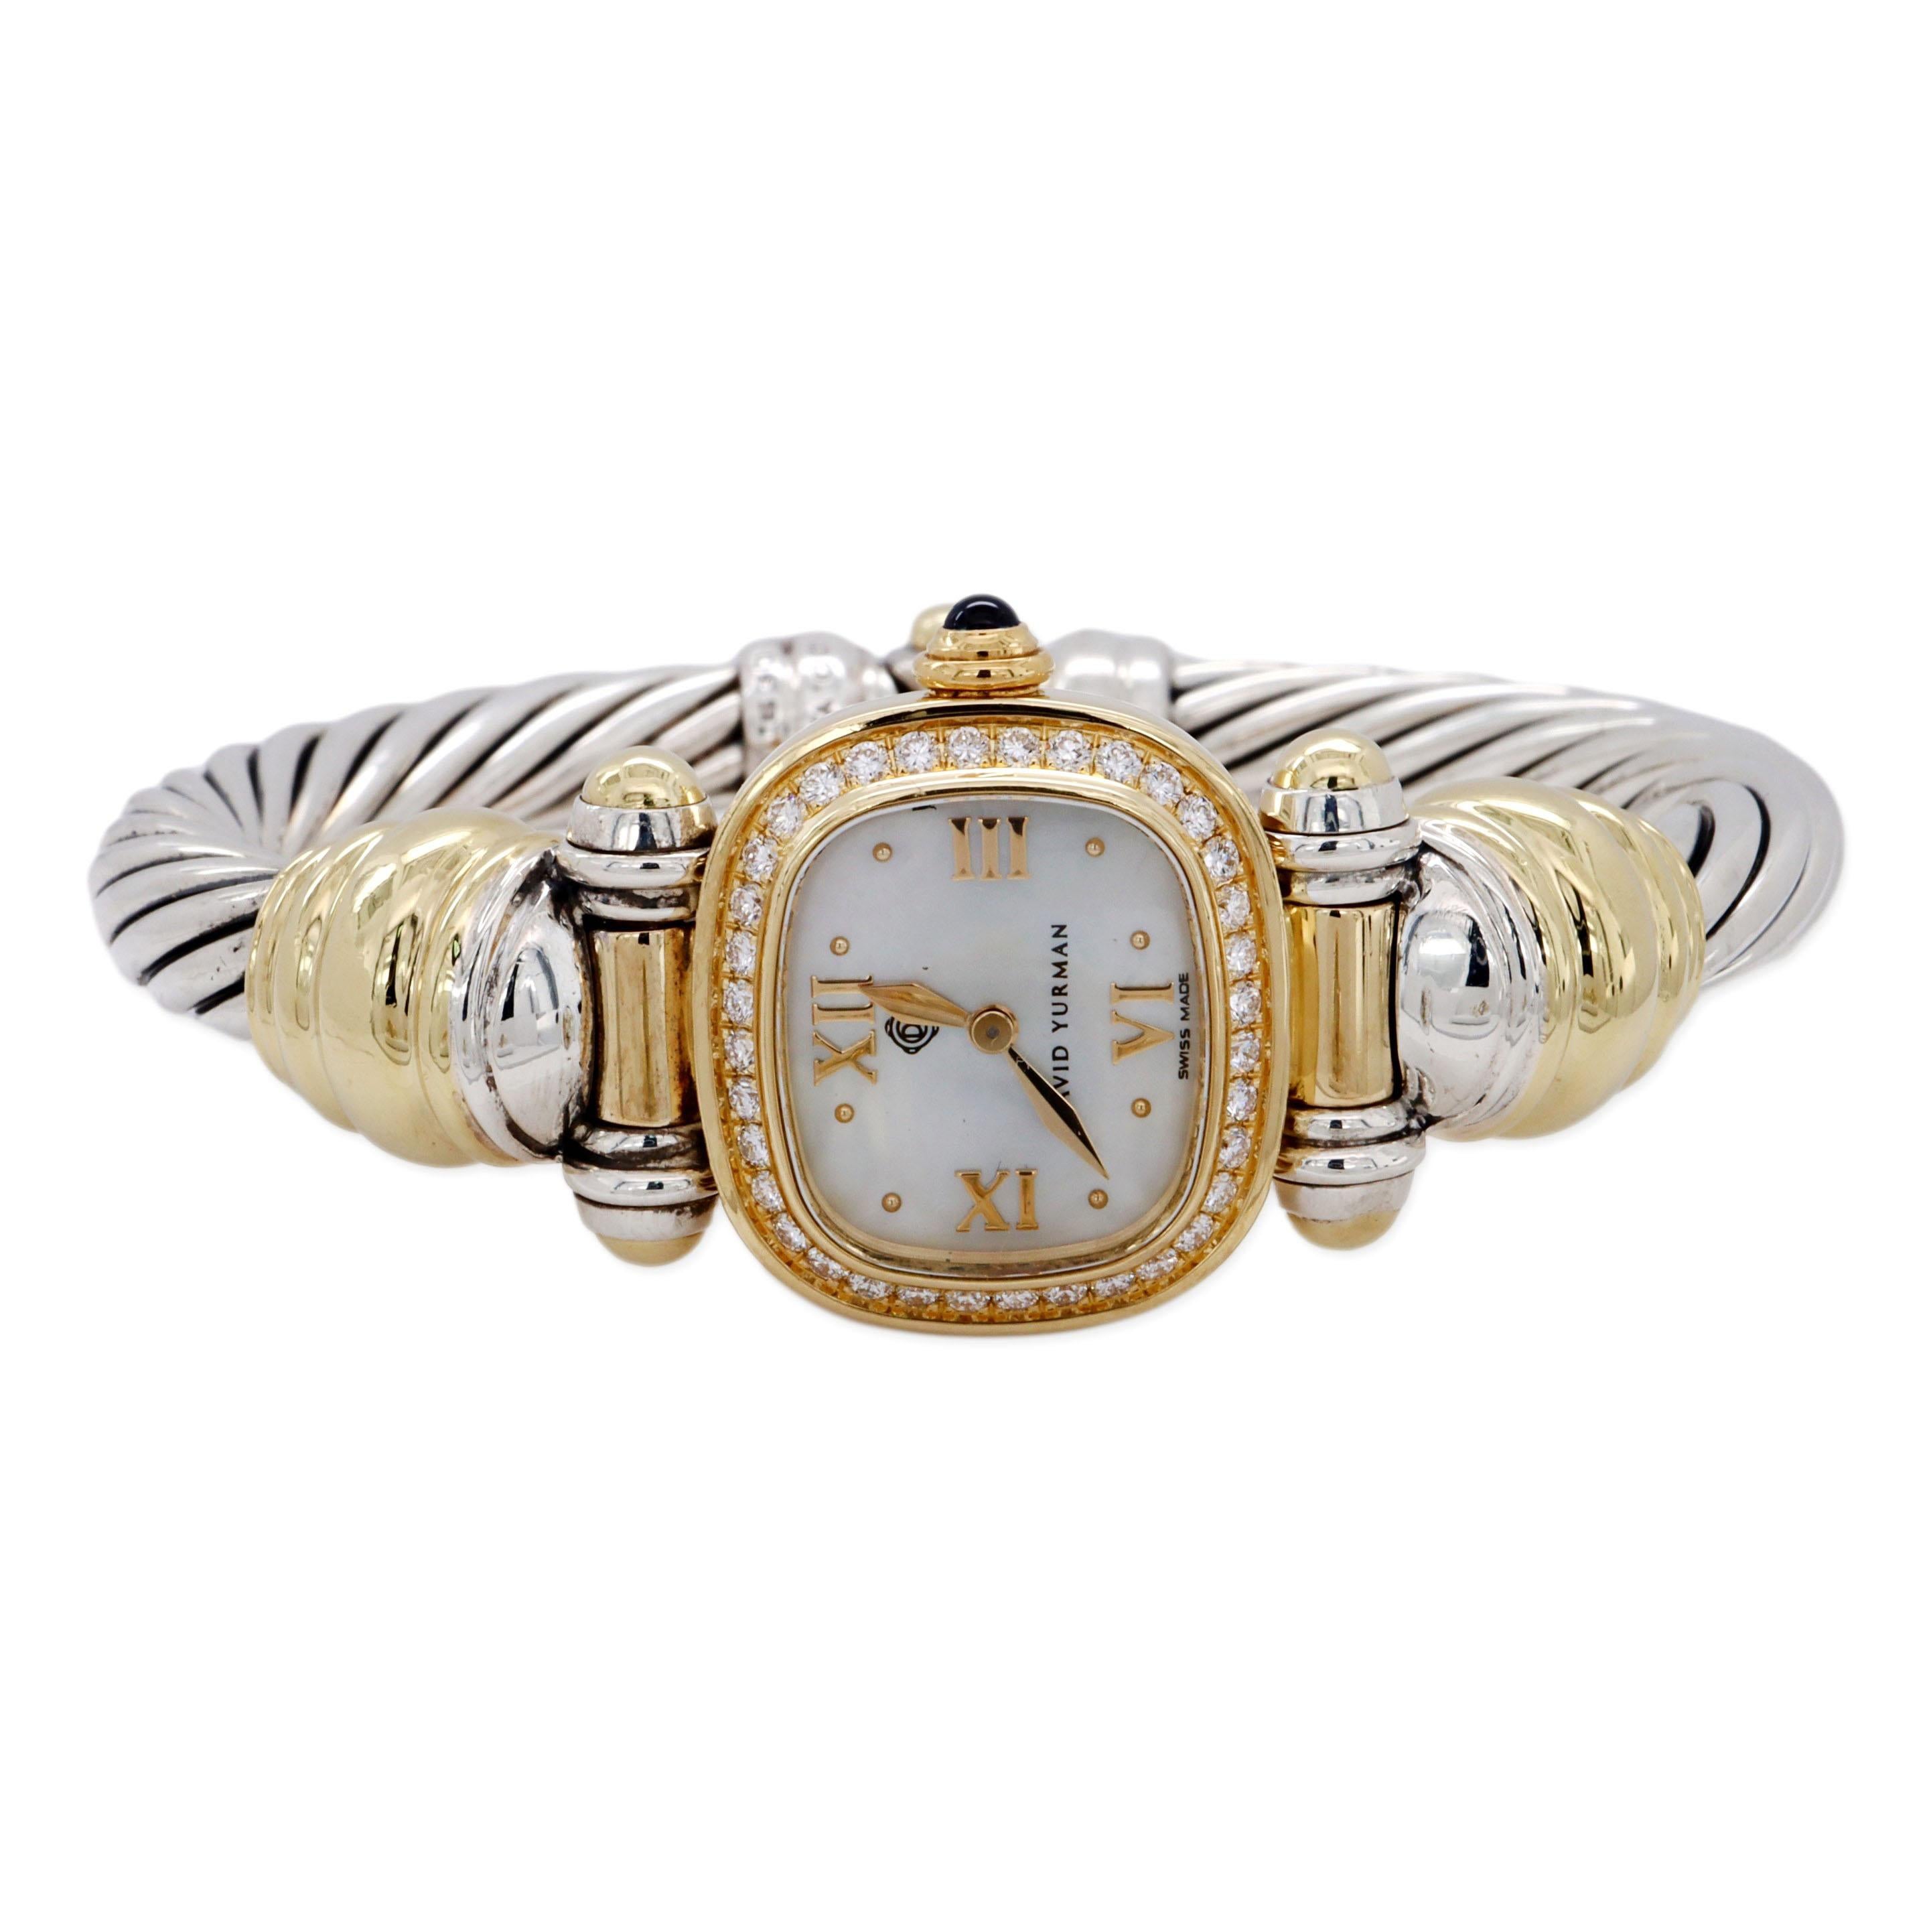 Vintage David Yurman ladies wrist watch finely crafted in 18 karat yellow gold and sterling silver featuring a 21mm diamond bezel watch face with a cabochon sapphire crown, sapphire crystal, mother of pearl dial and gold roman numeral markers. The